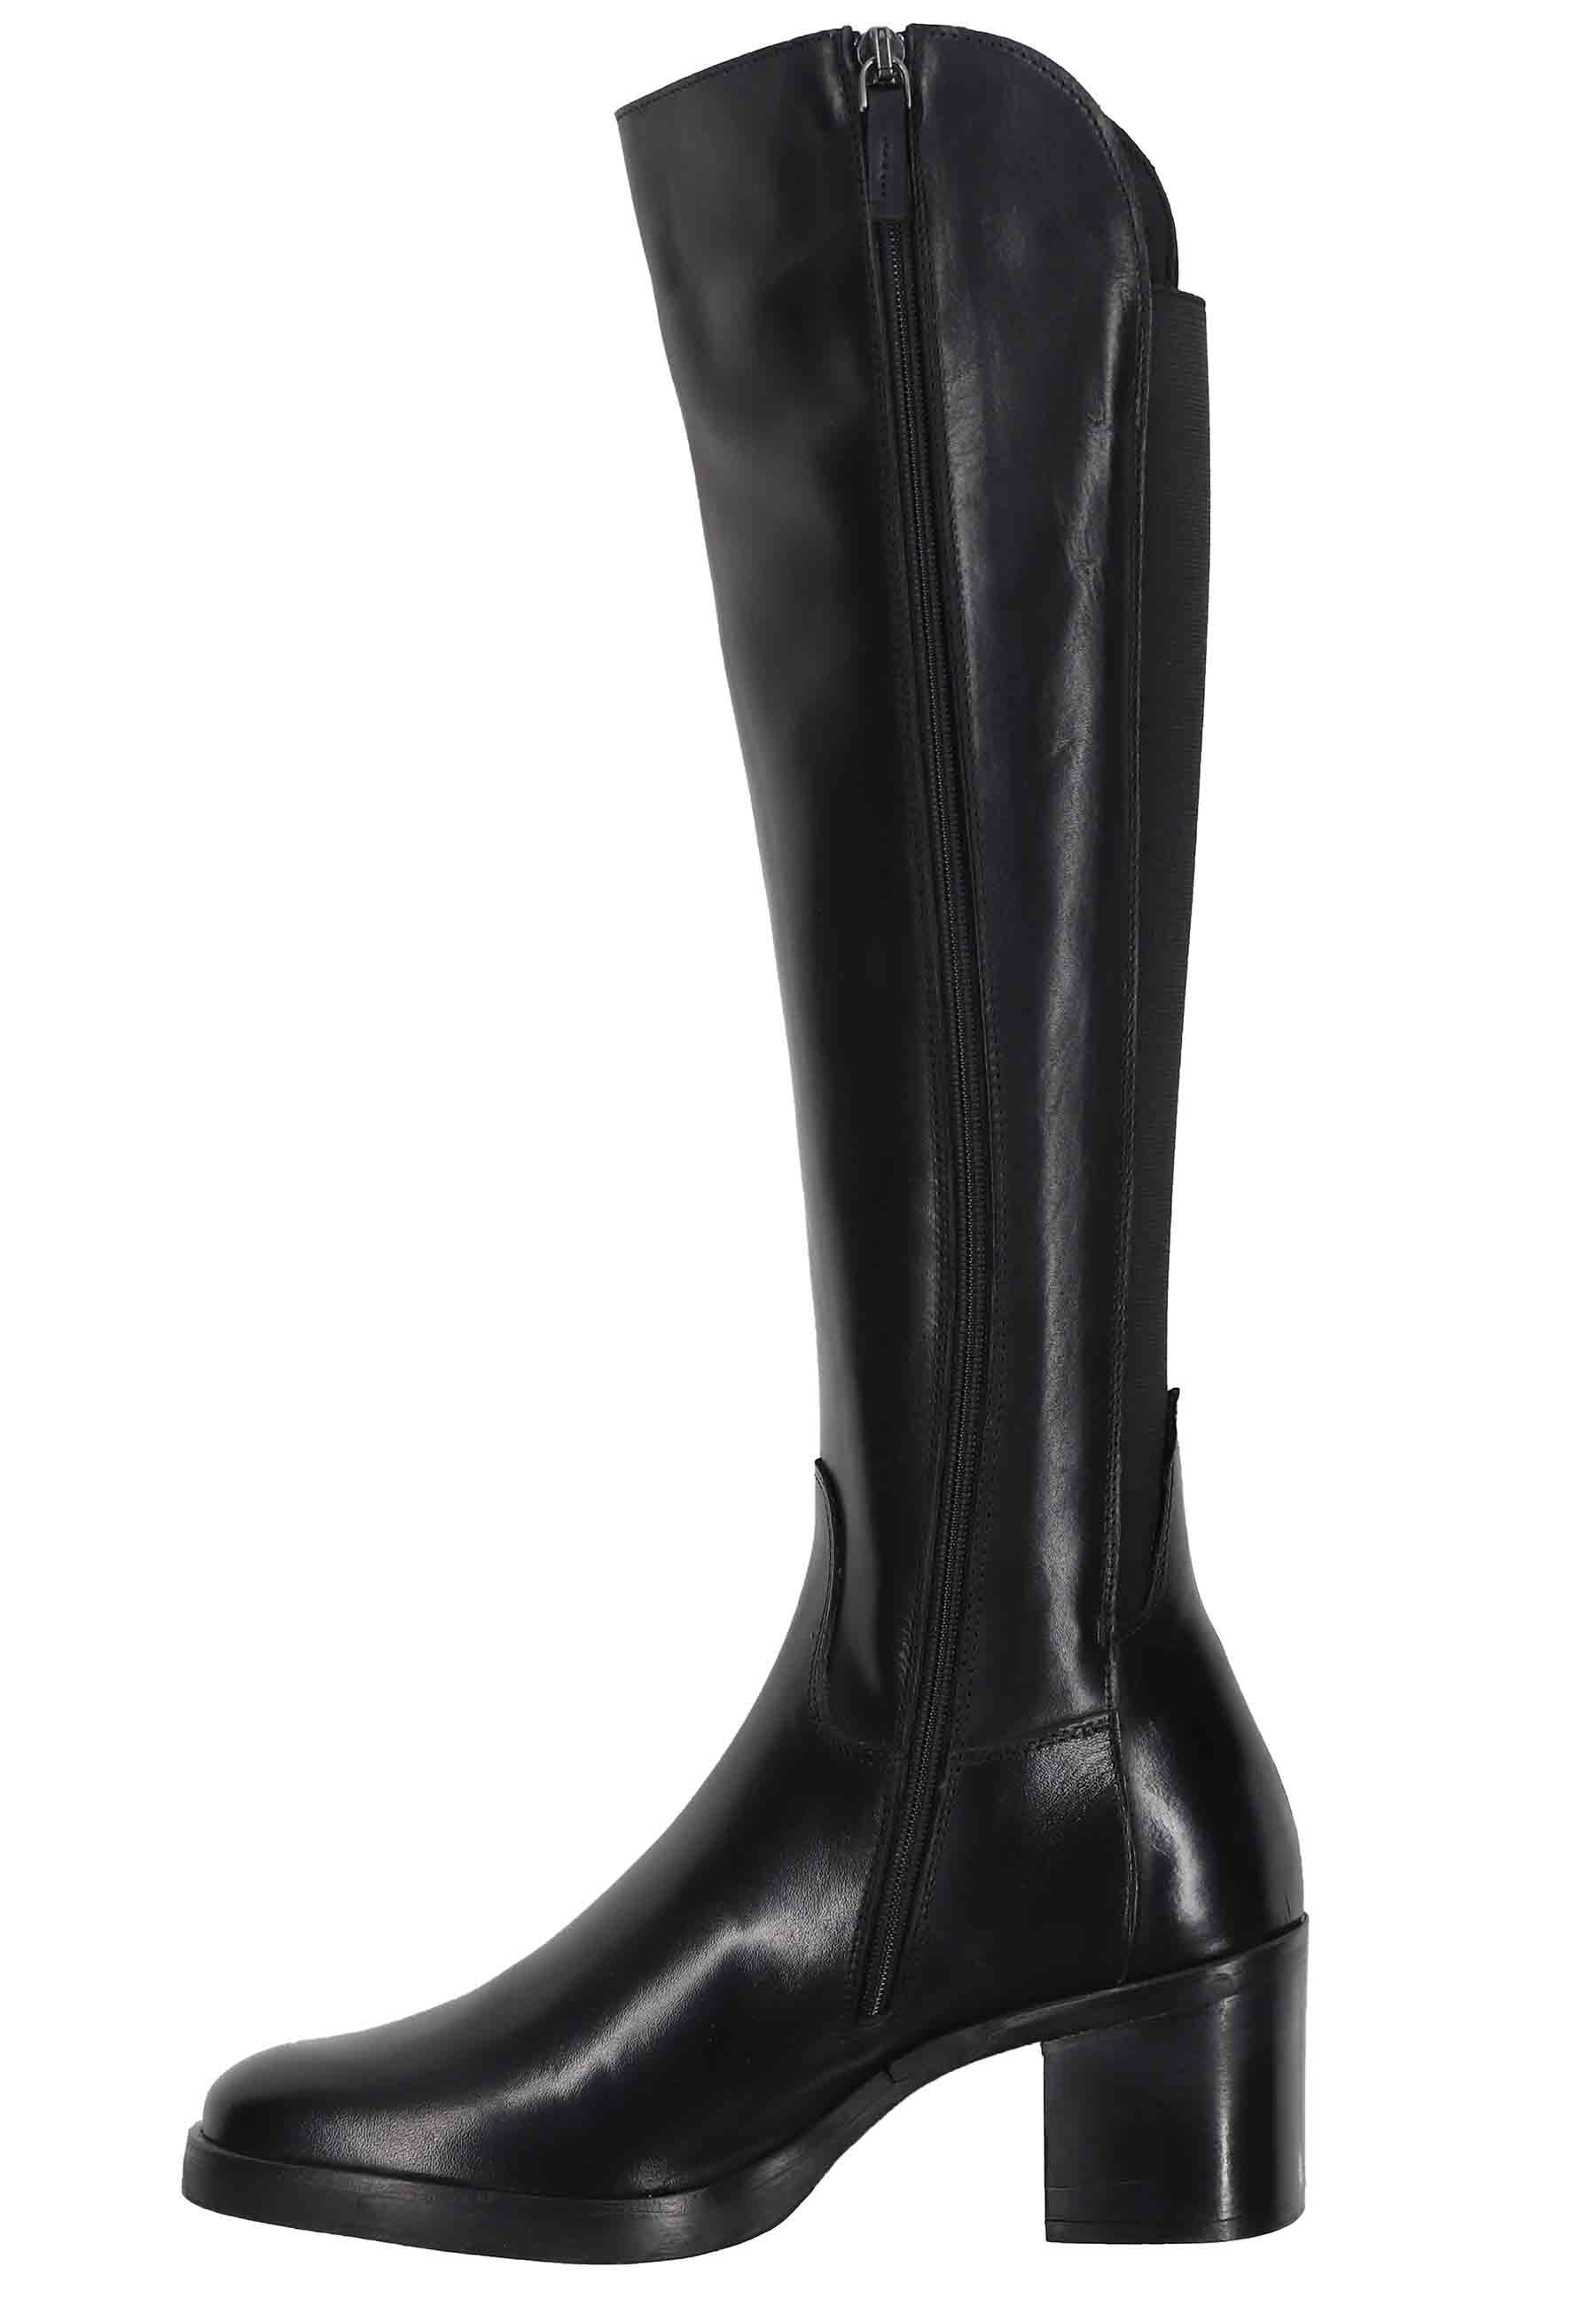 Women's black leather boots with knee gaiter and round toe